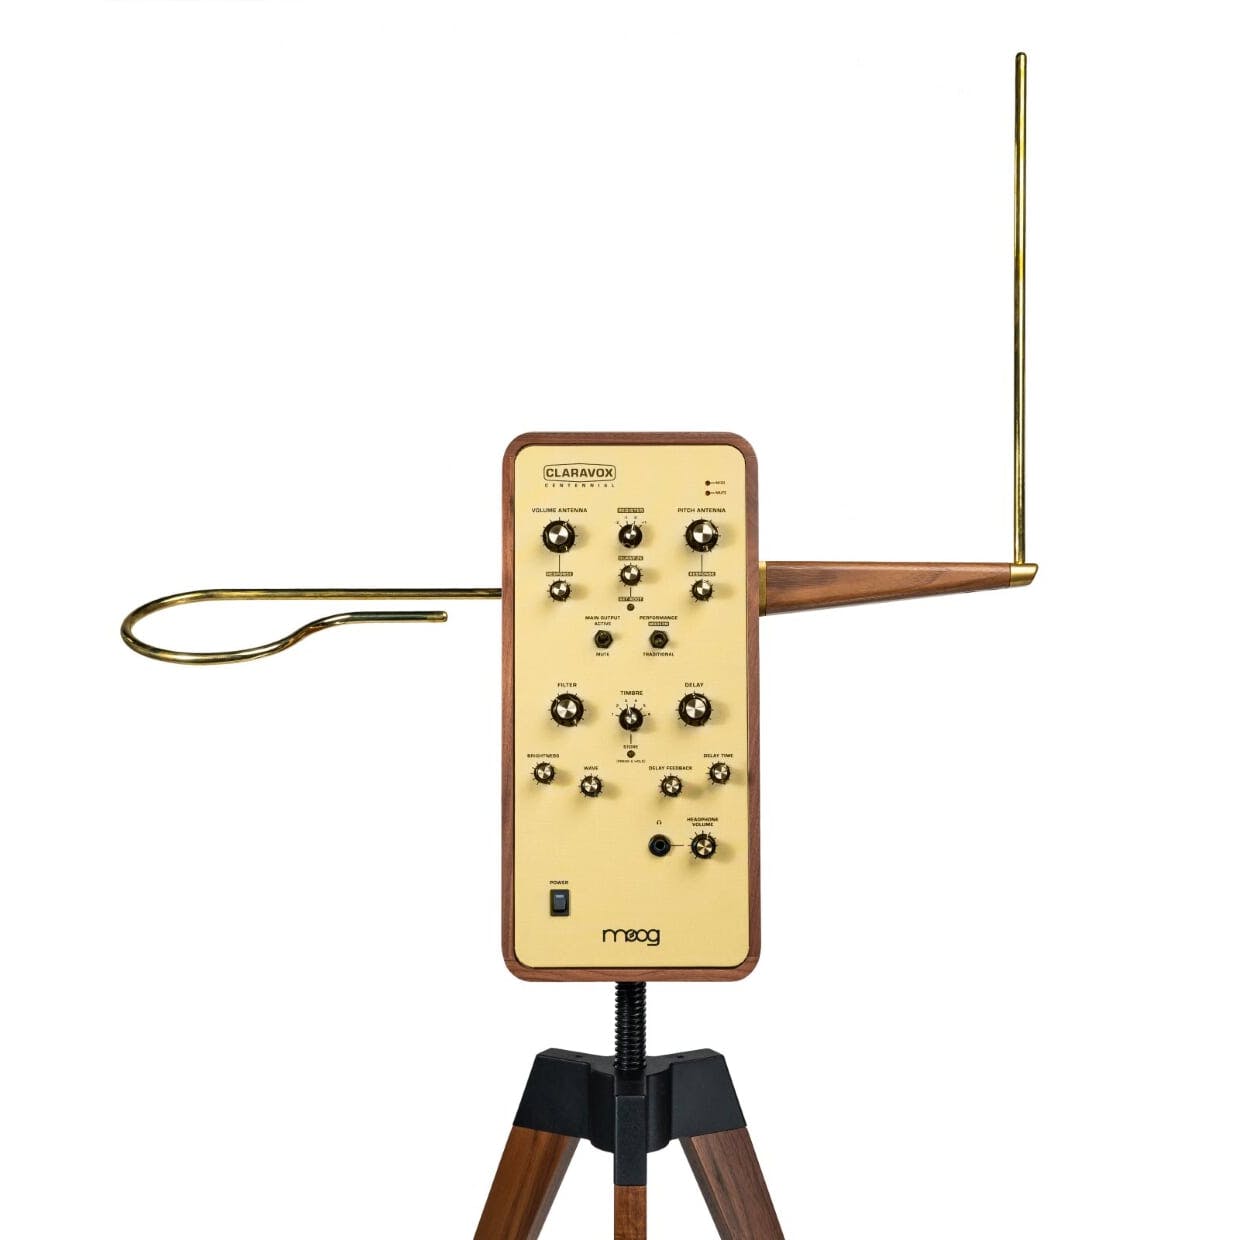 Meet the New Etherwave Theremin